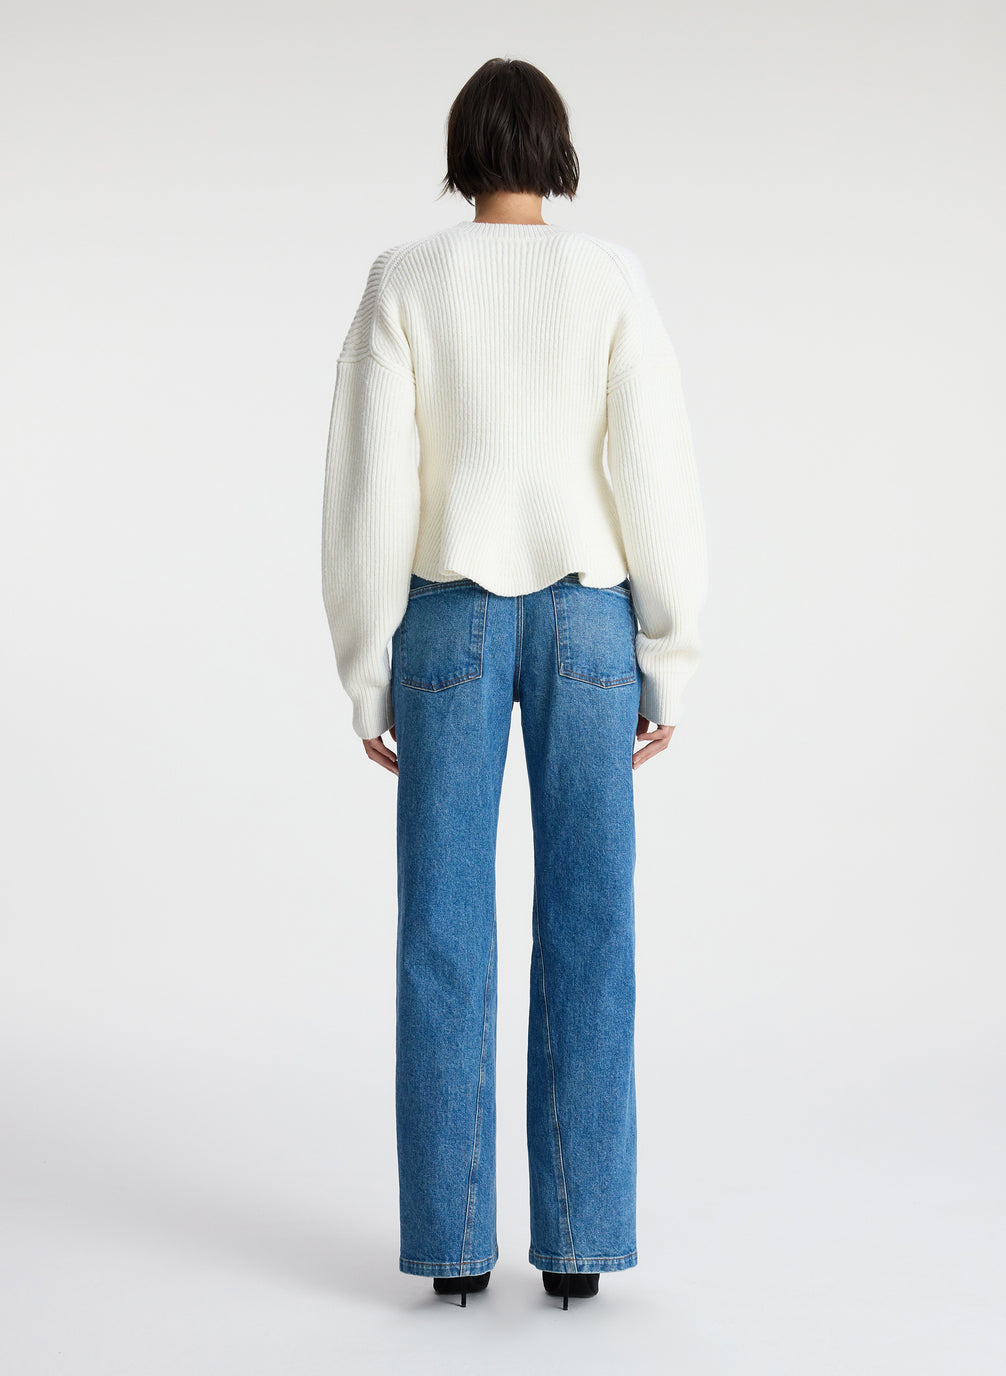 back view of woman wearing white peplum sweater and medium blue wash denim jeans